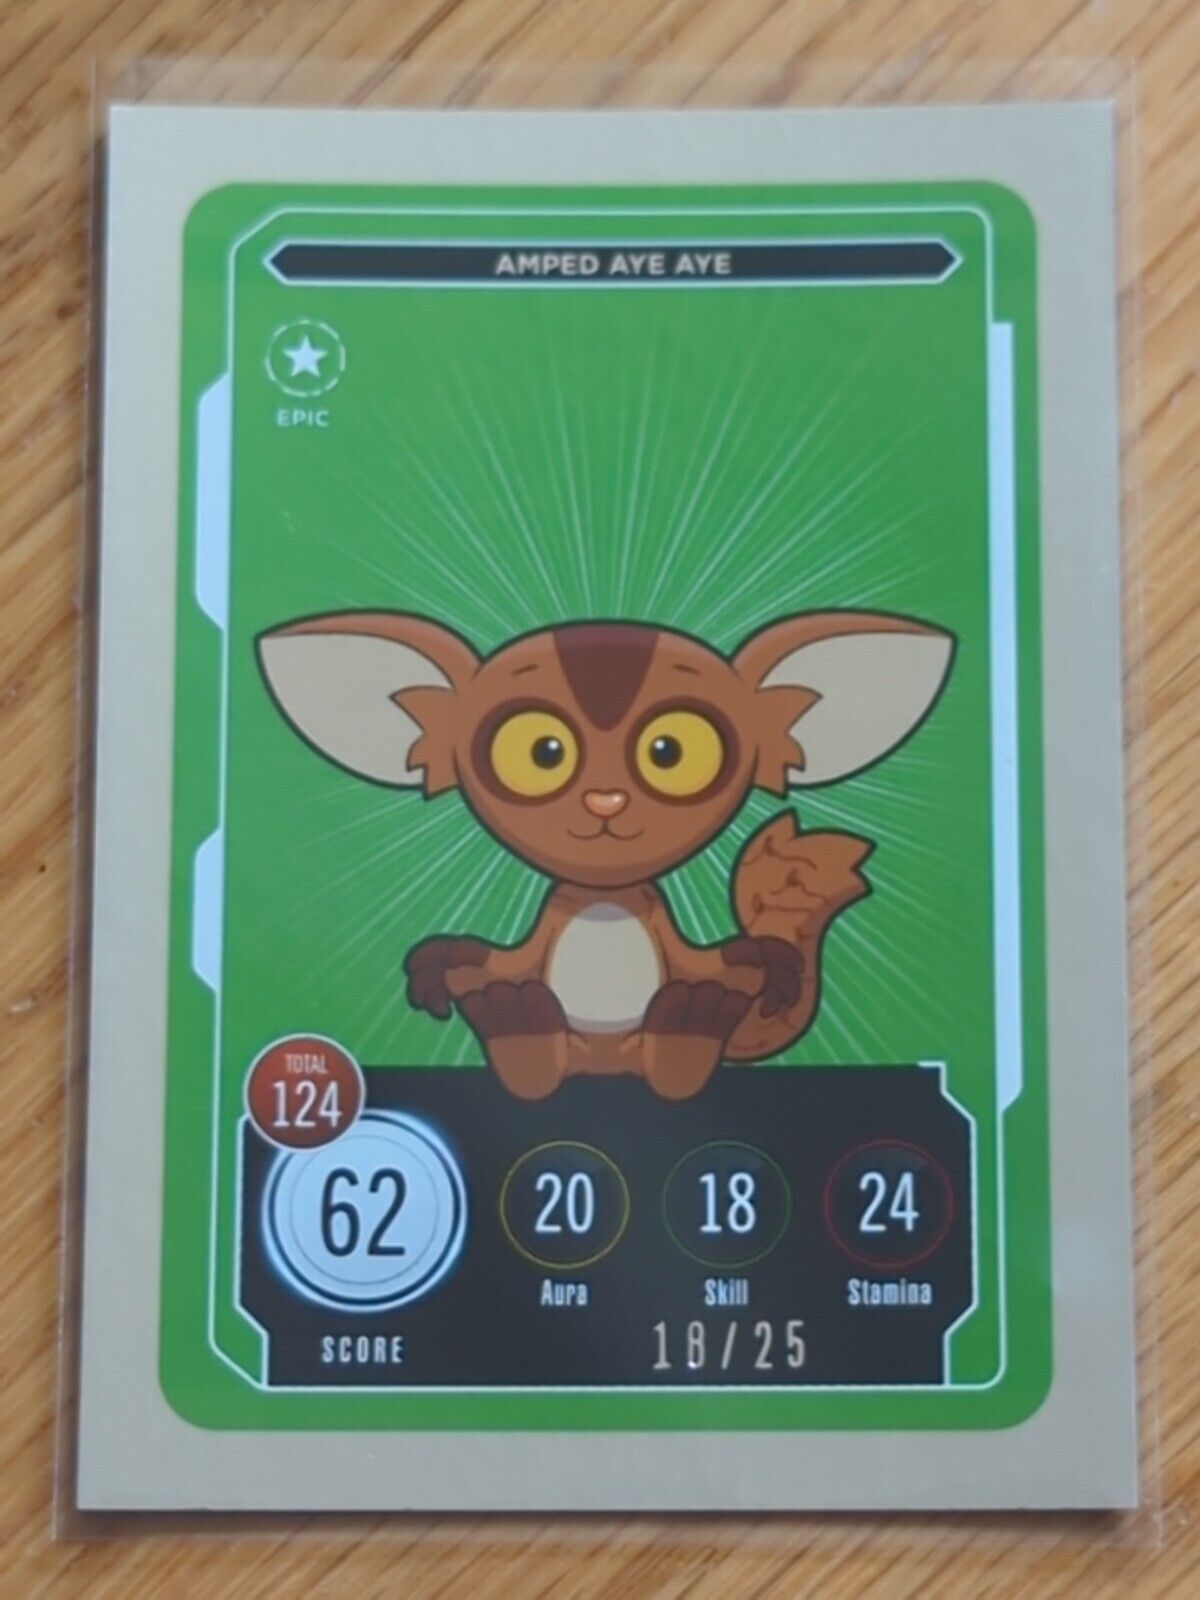 Amped Aye Aye EPIC 18/25 Compete and Collect Veefriends Trading Cards